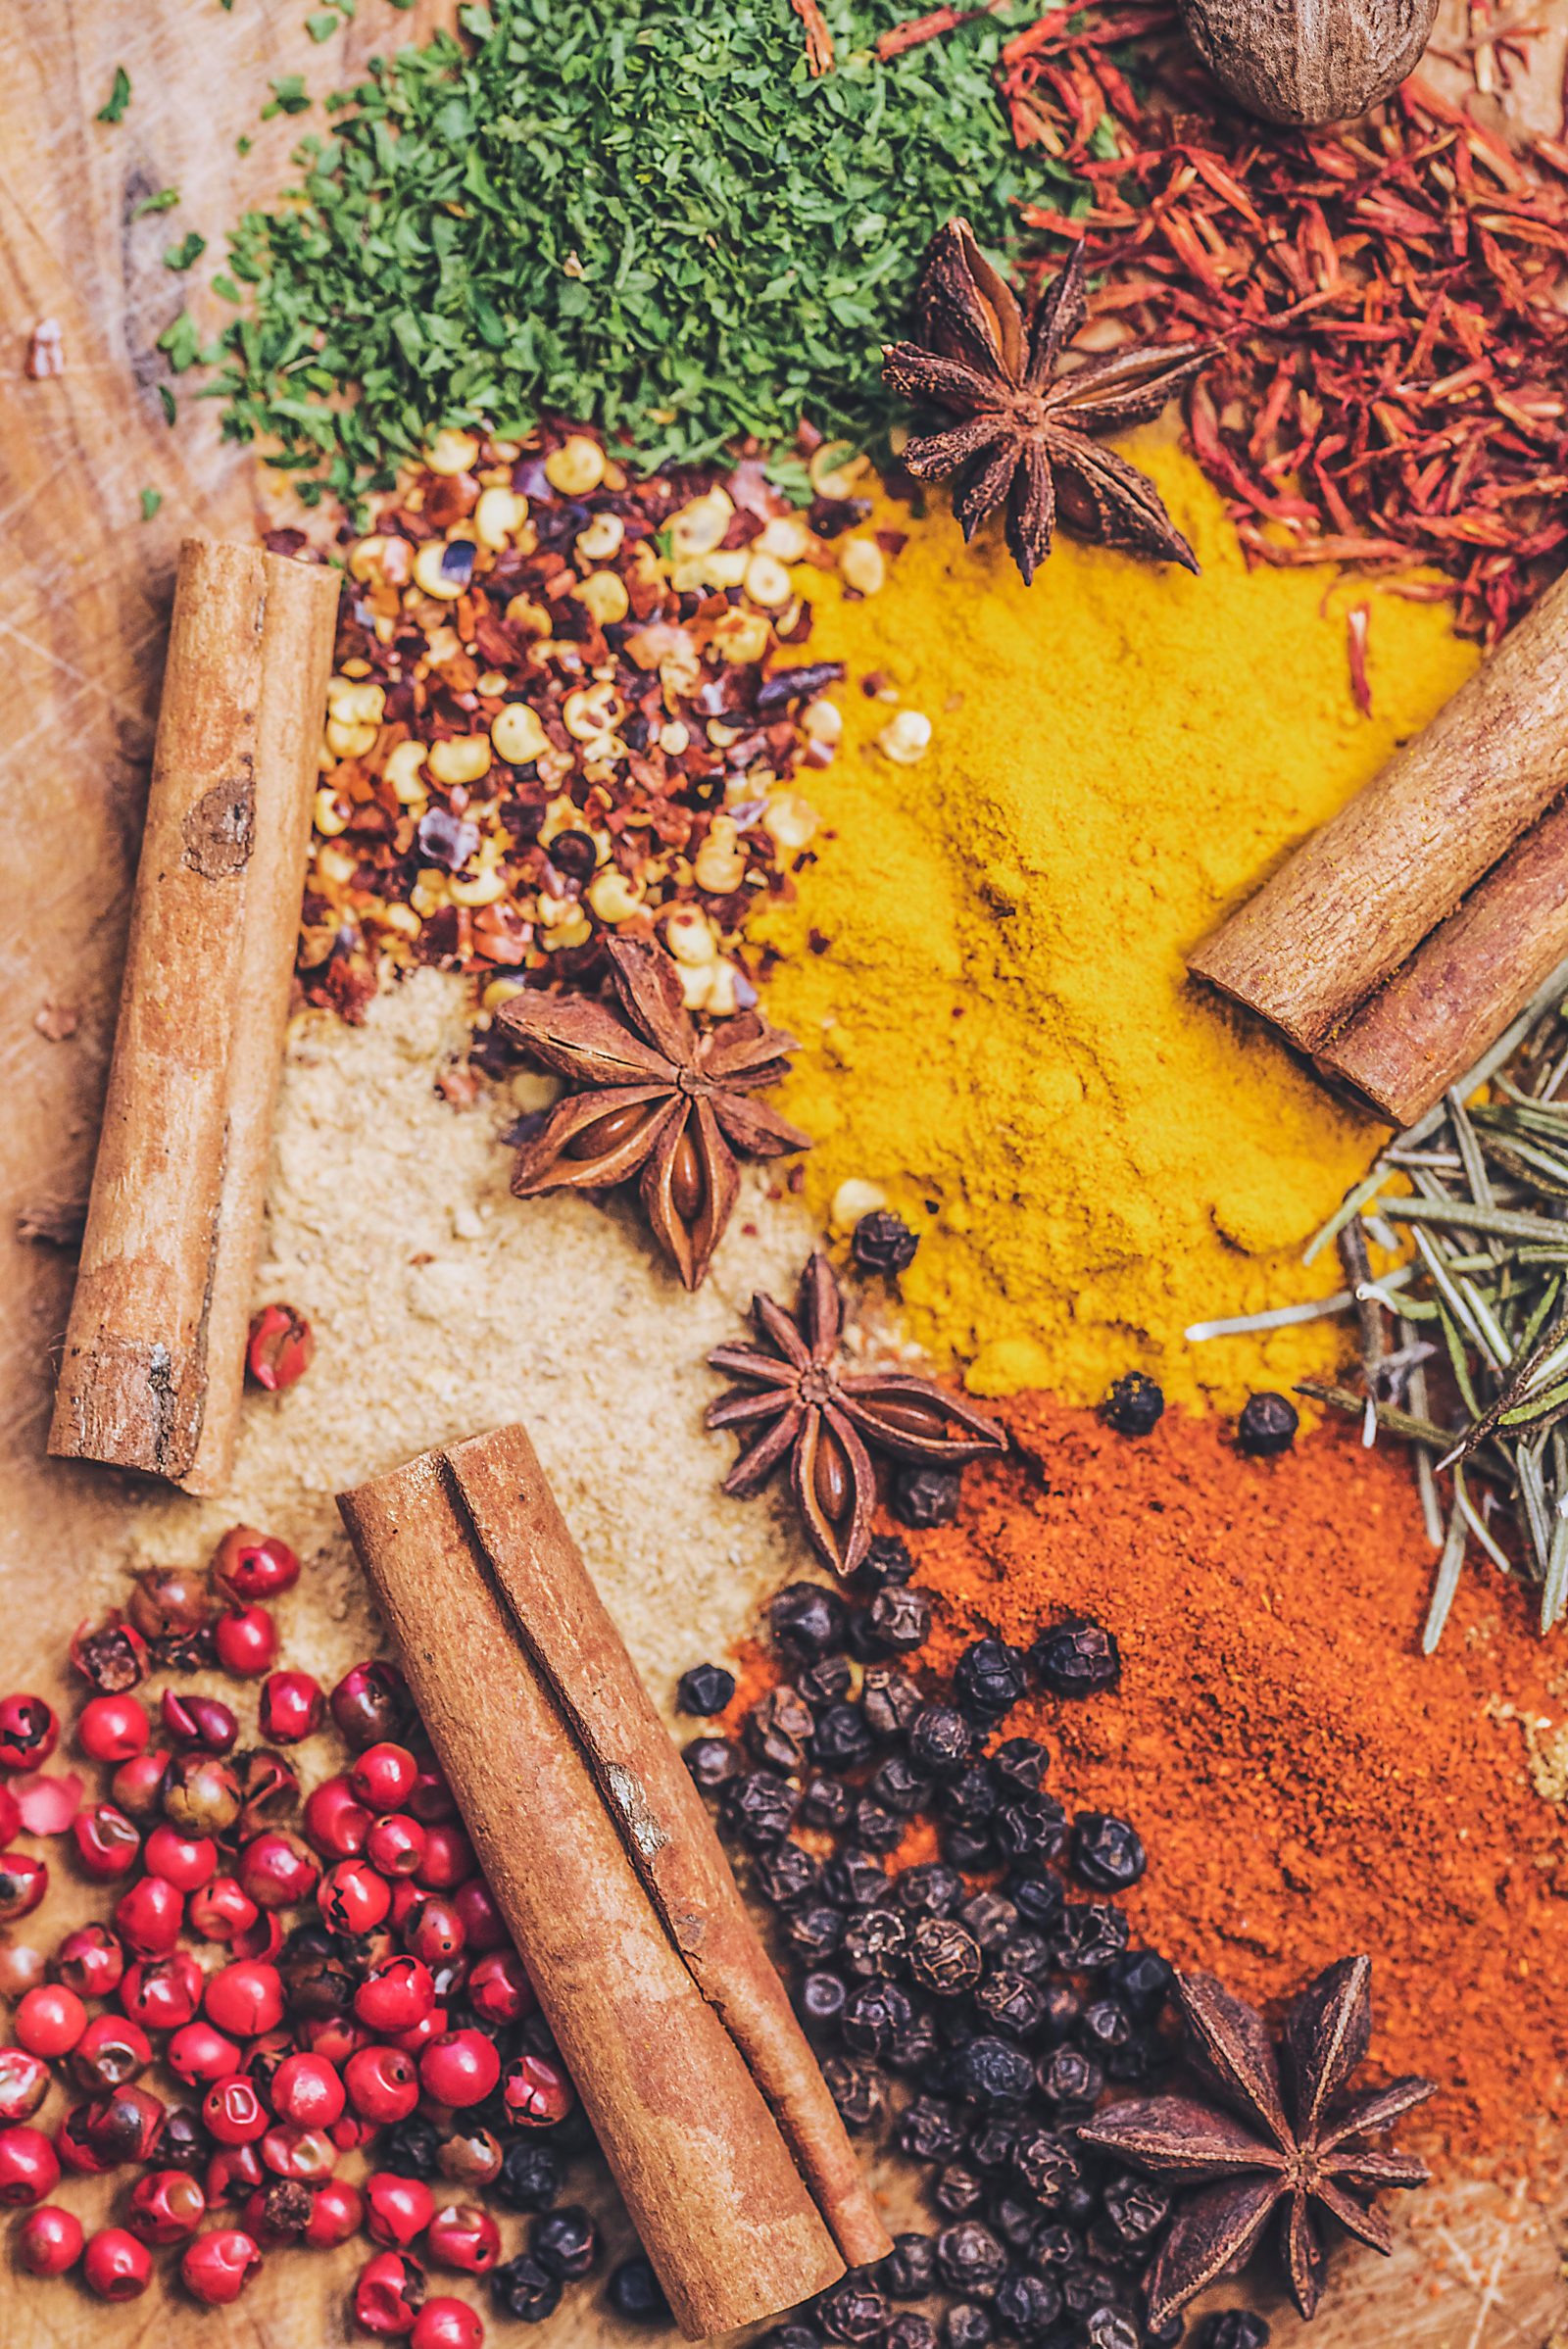 Colourful spices like cinnamon, cloves, pepper and turmeric